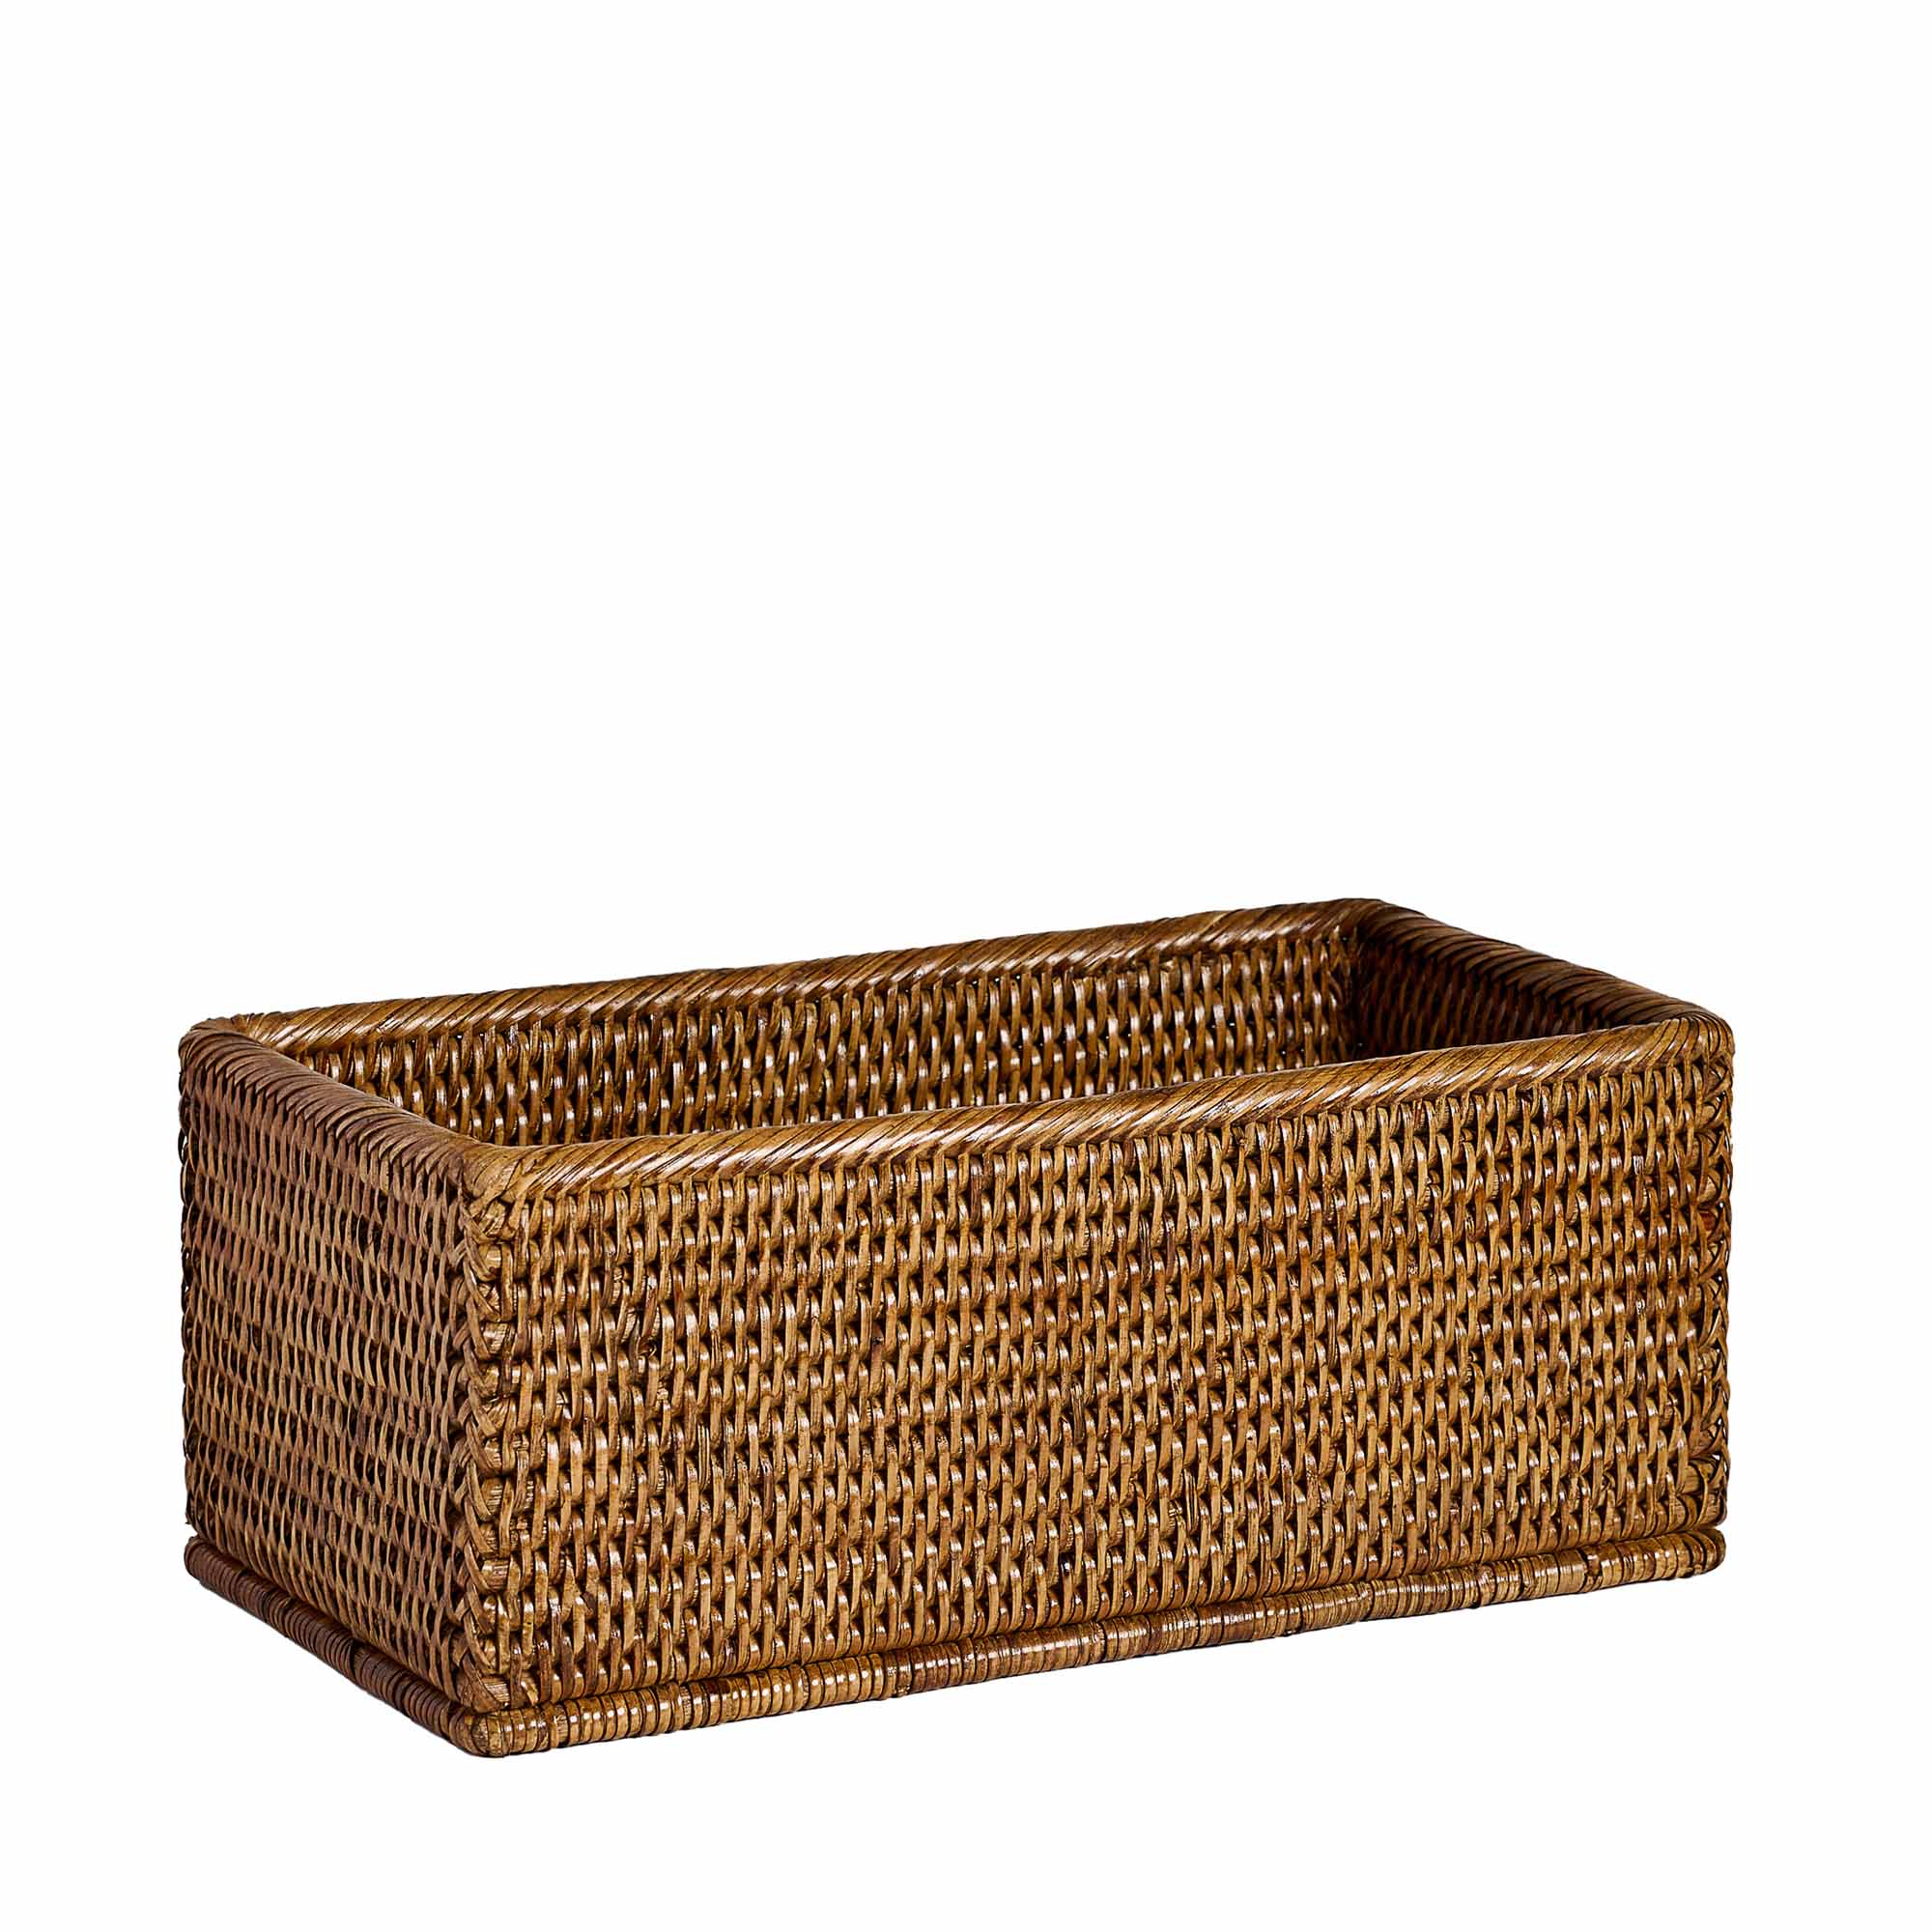 Village container in Rattan Natural 32x16x14 cm